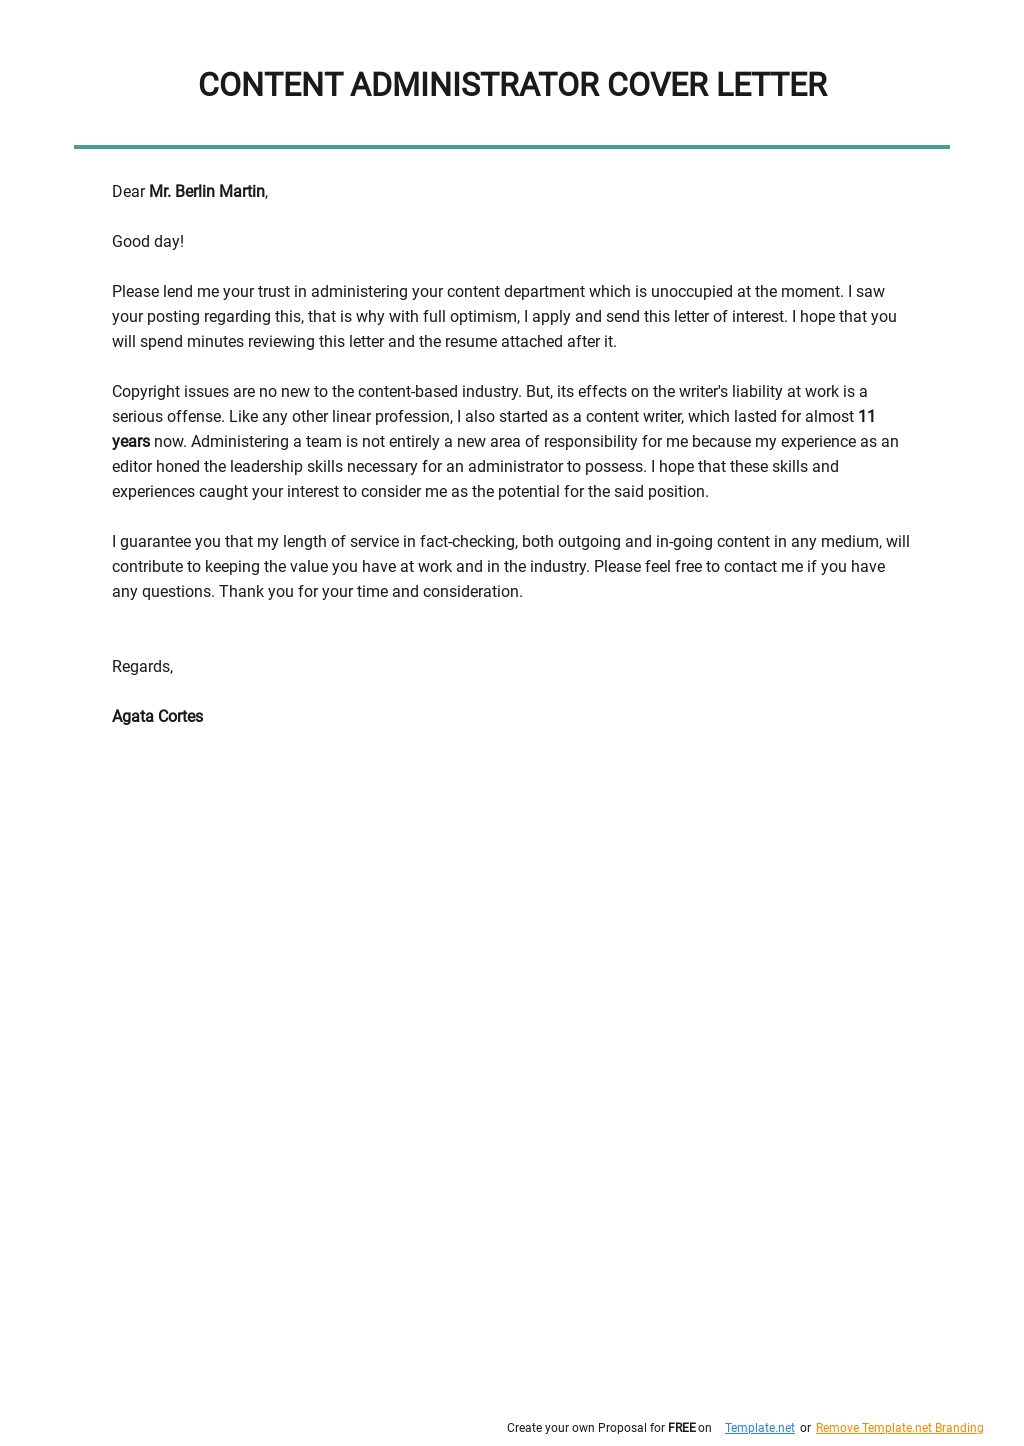 Content Administrator Cover Letter Template.jpe